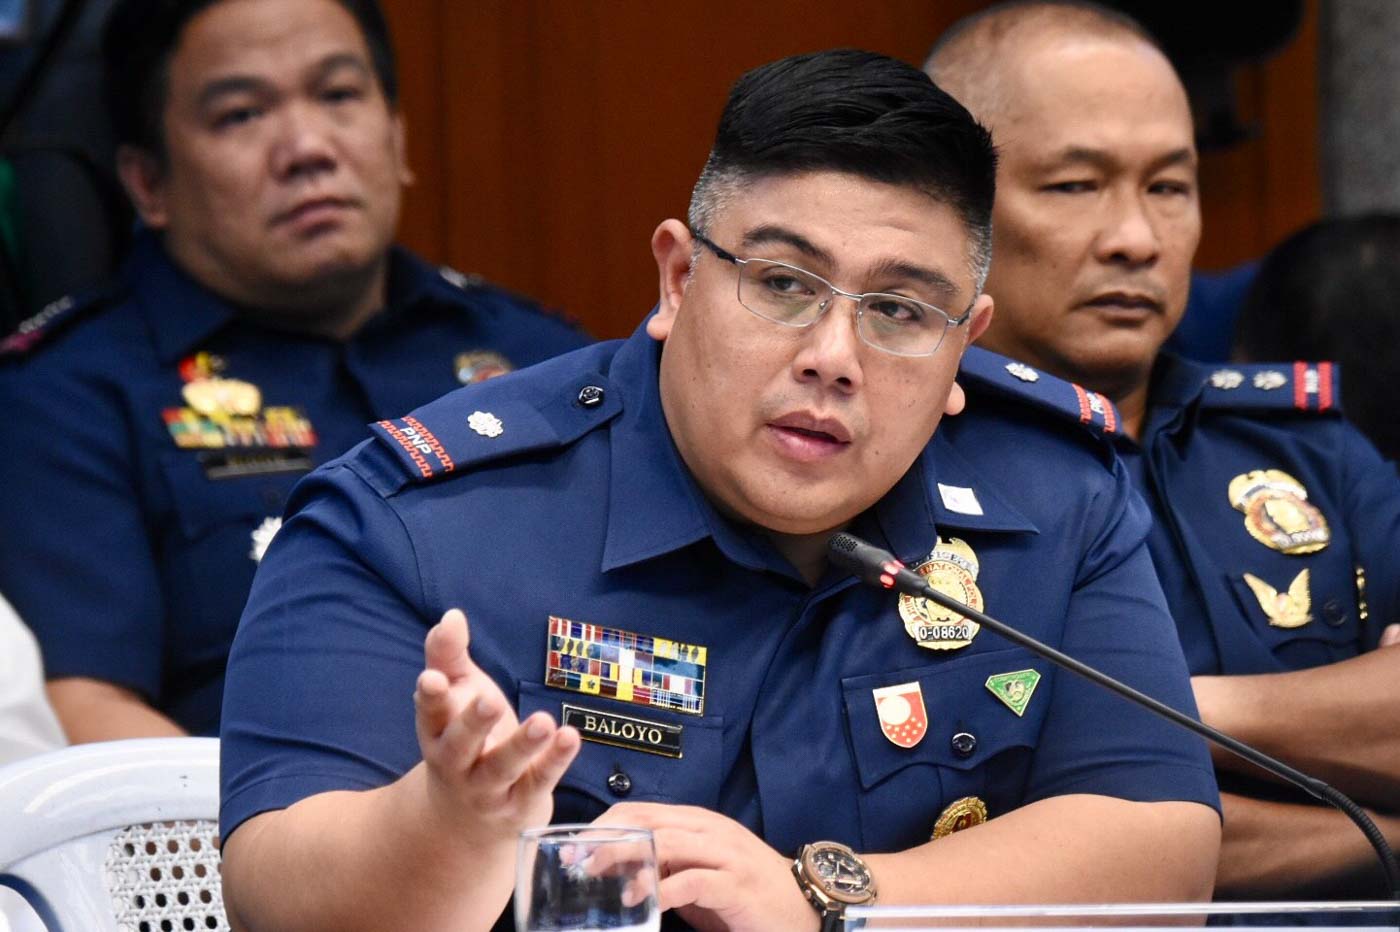 JUICY POST. Senators are enraged on why Major Rodney Baloyo IV holds the acting Tagaytay police chief post given his involvement in the 2013 illegal drug raid. Photo by Angie de Silva/Rappler 